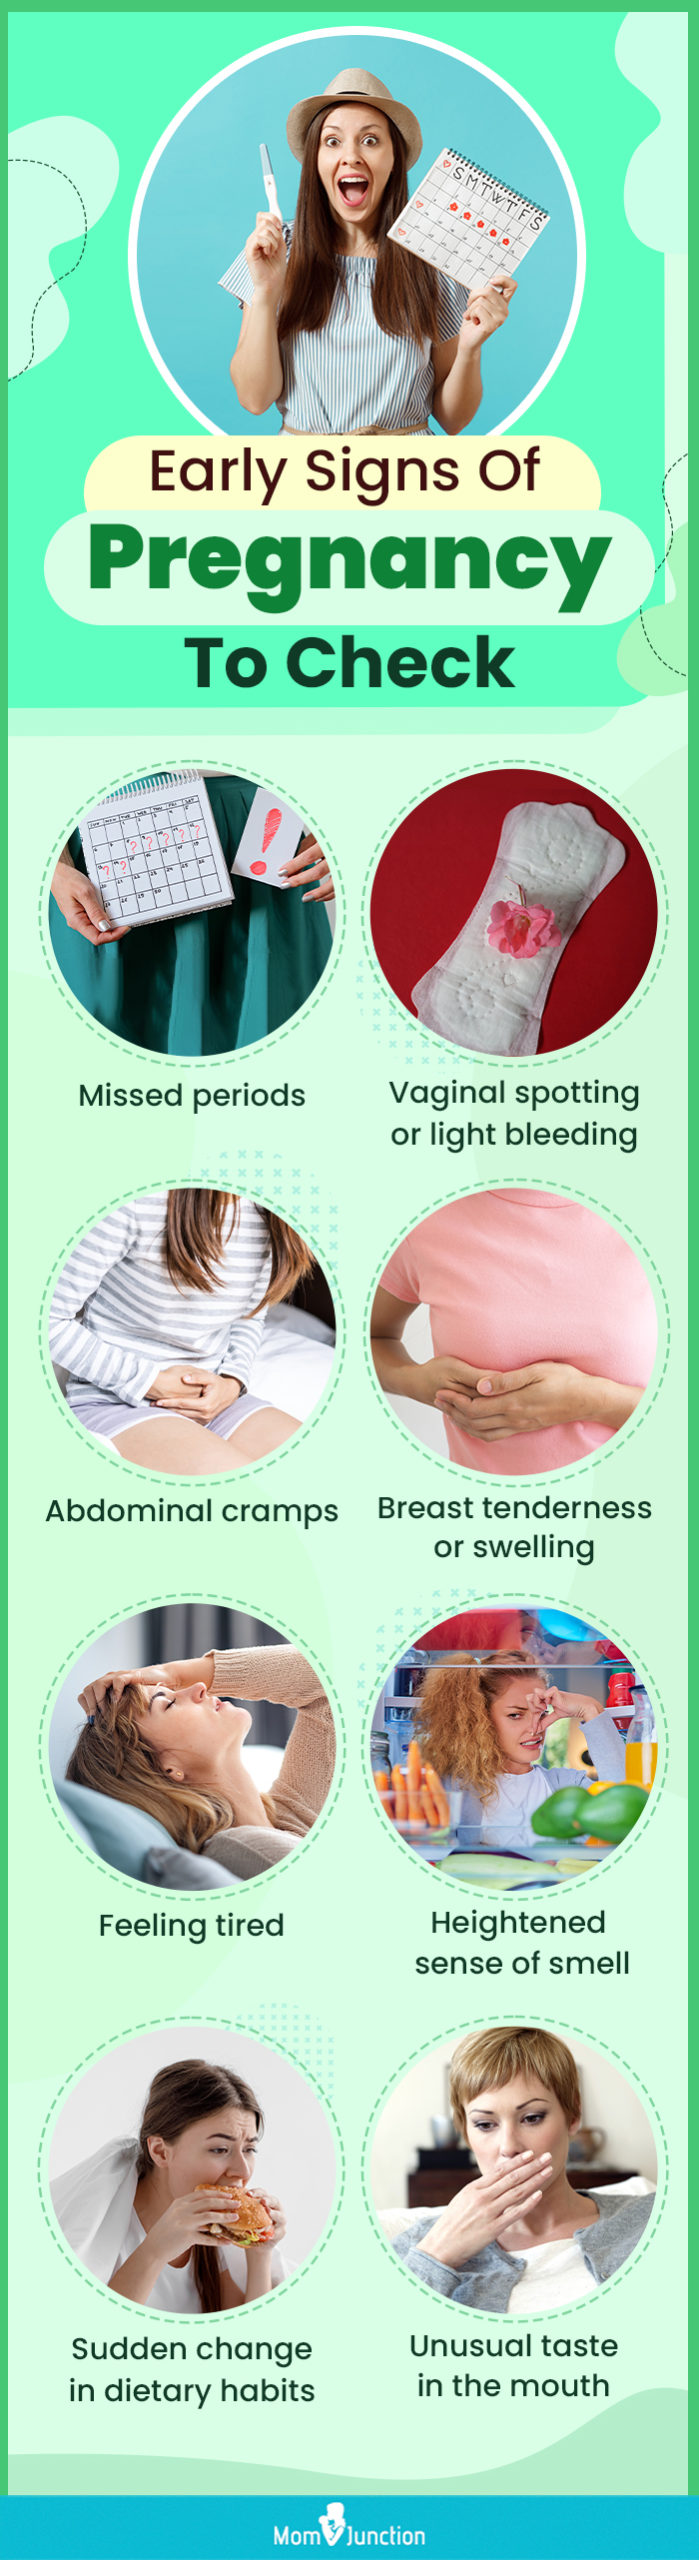 Early Signs of Pregnancy to Look Out For – mamaxpert